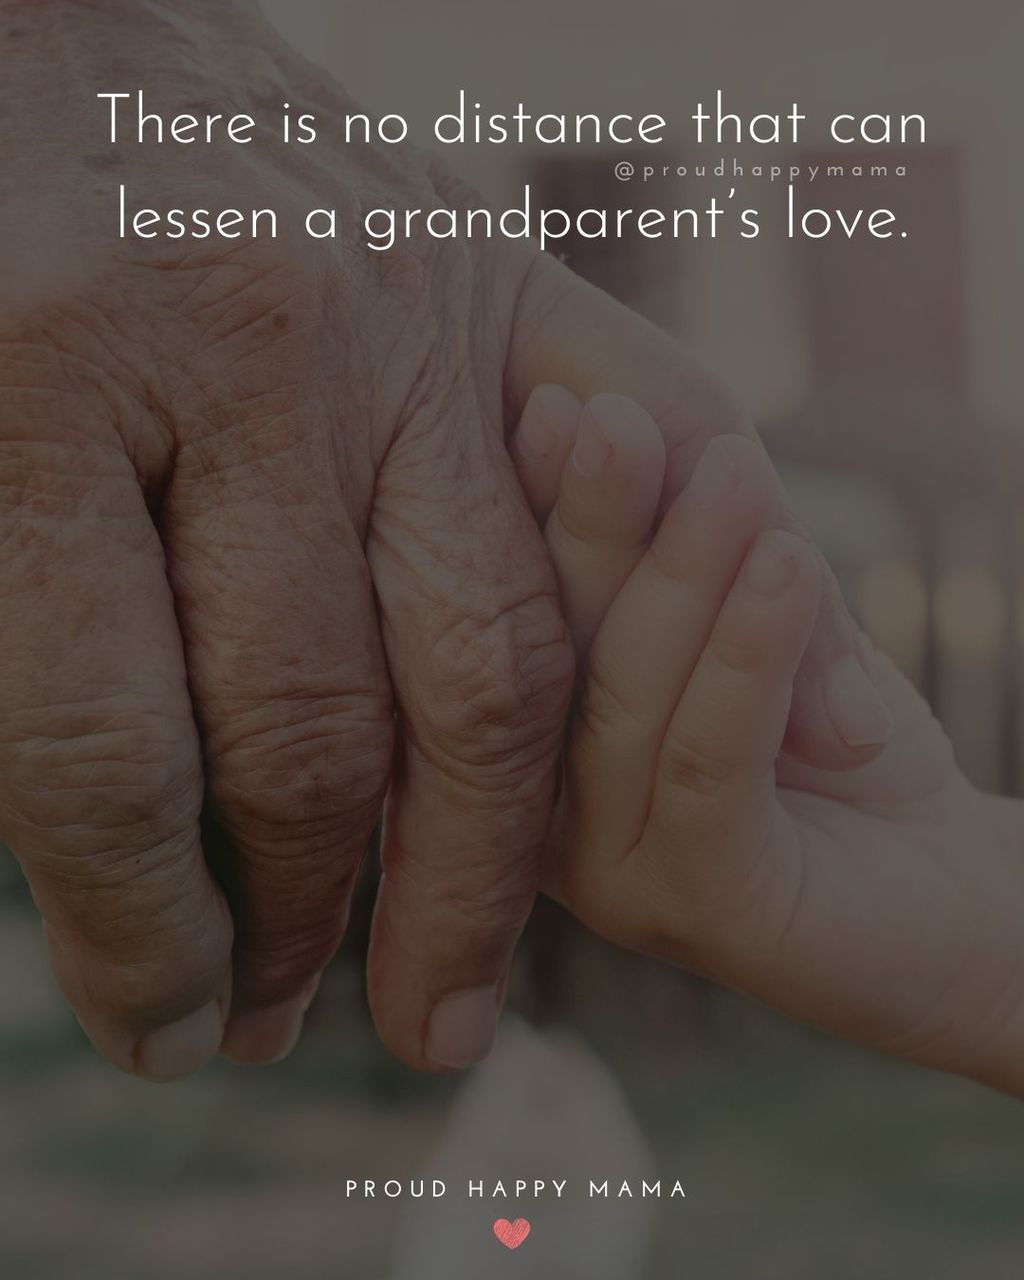 Quotes On Grandparents Day | There is no distance that can lessen a grandparent’s love.